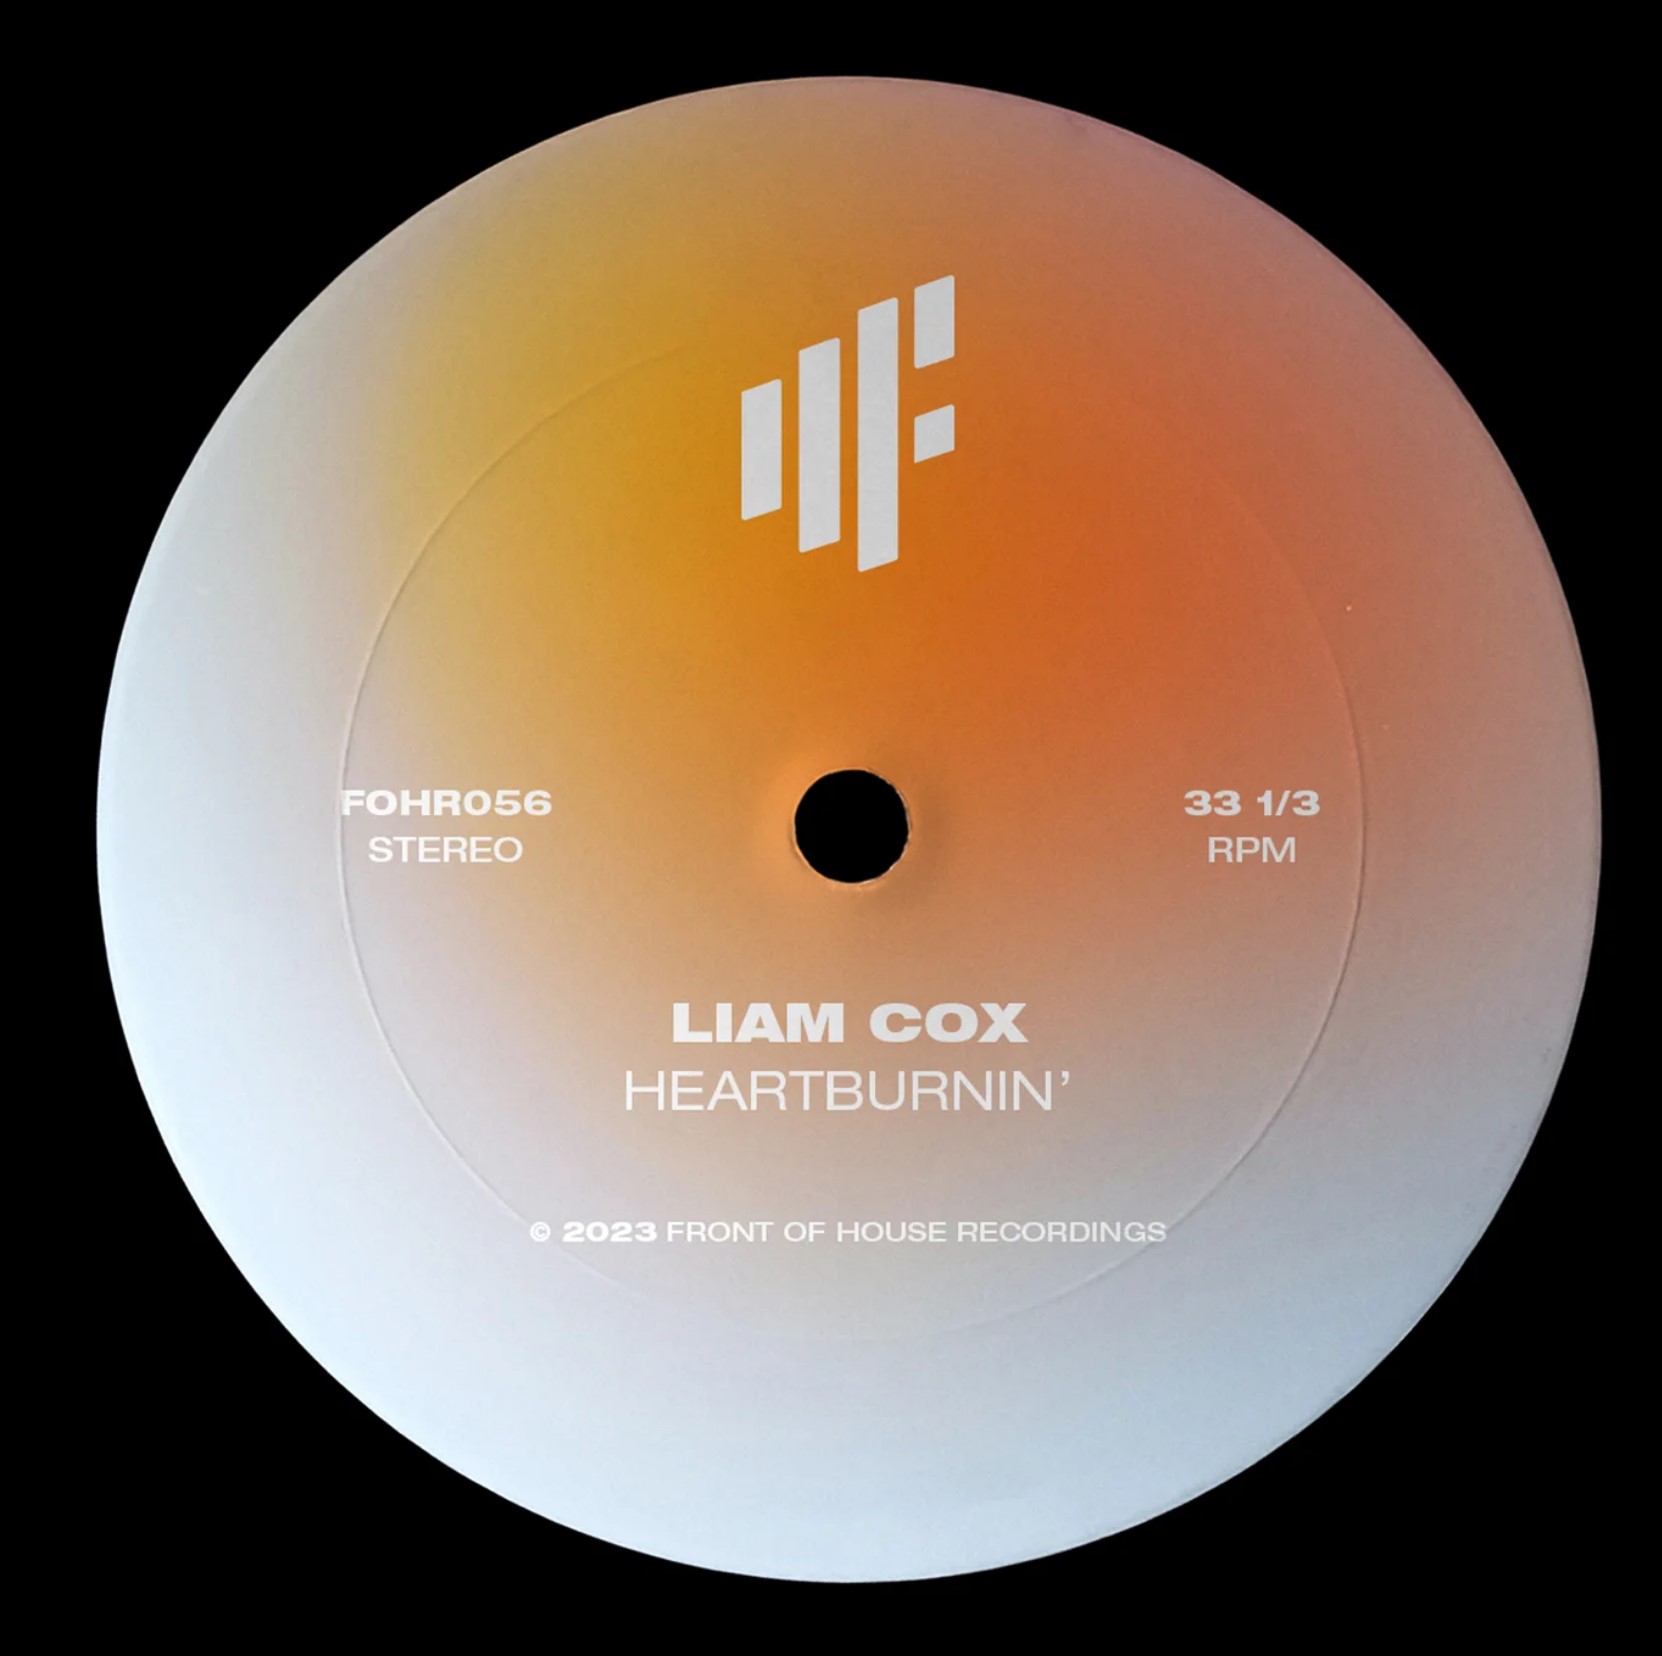 Liam Cox Gets Our HeartBurnin’ With New Heater